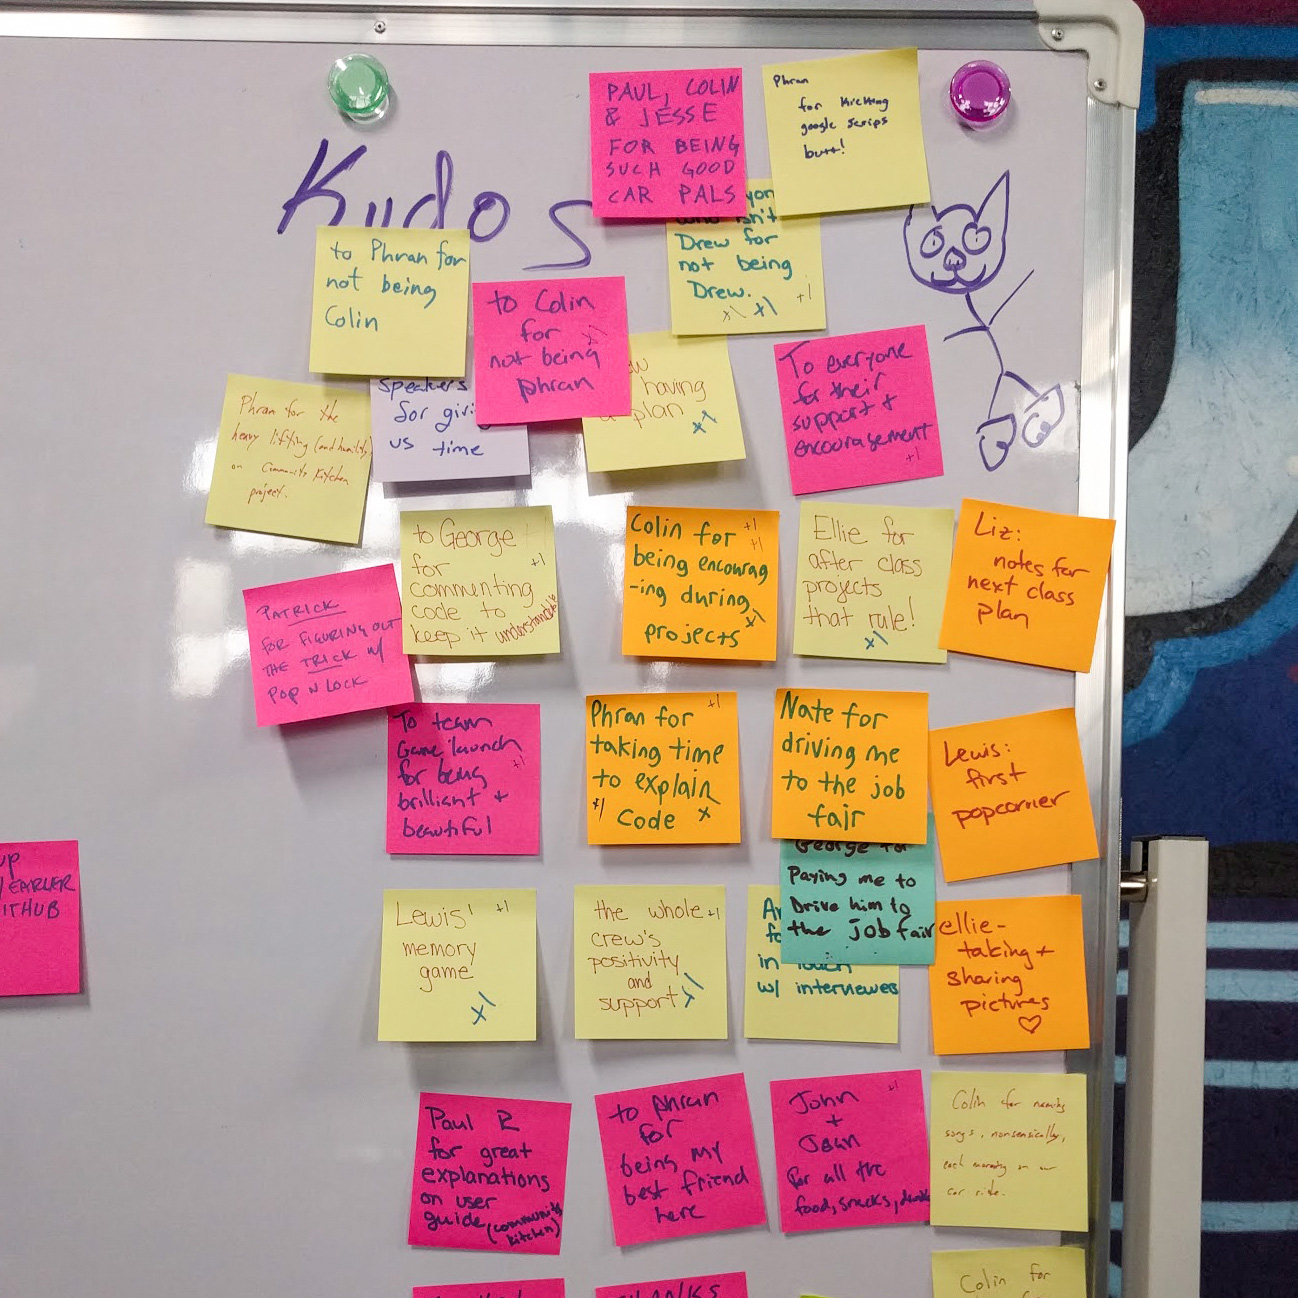 Sticky notes show reflections from Academy PGH students. (Photo: Jean Lange/via Academy PGH)